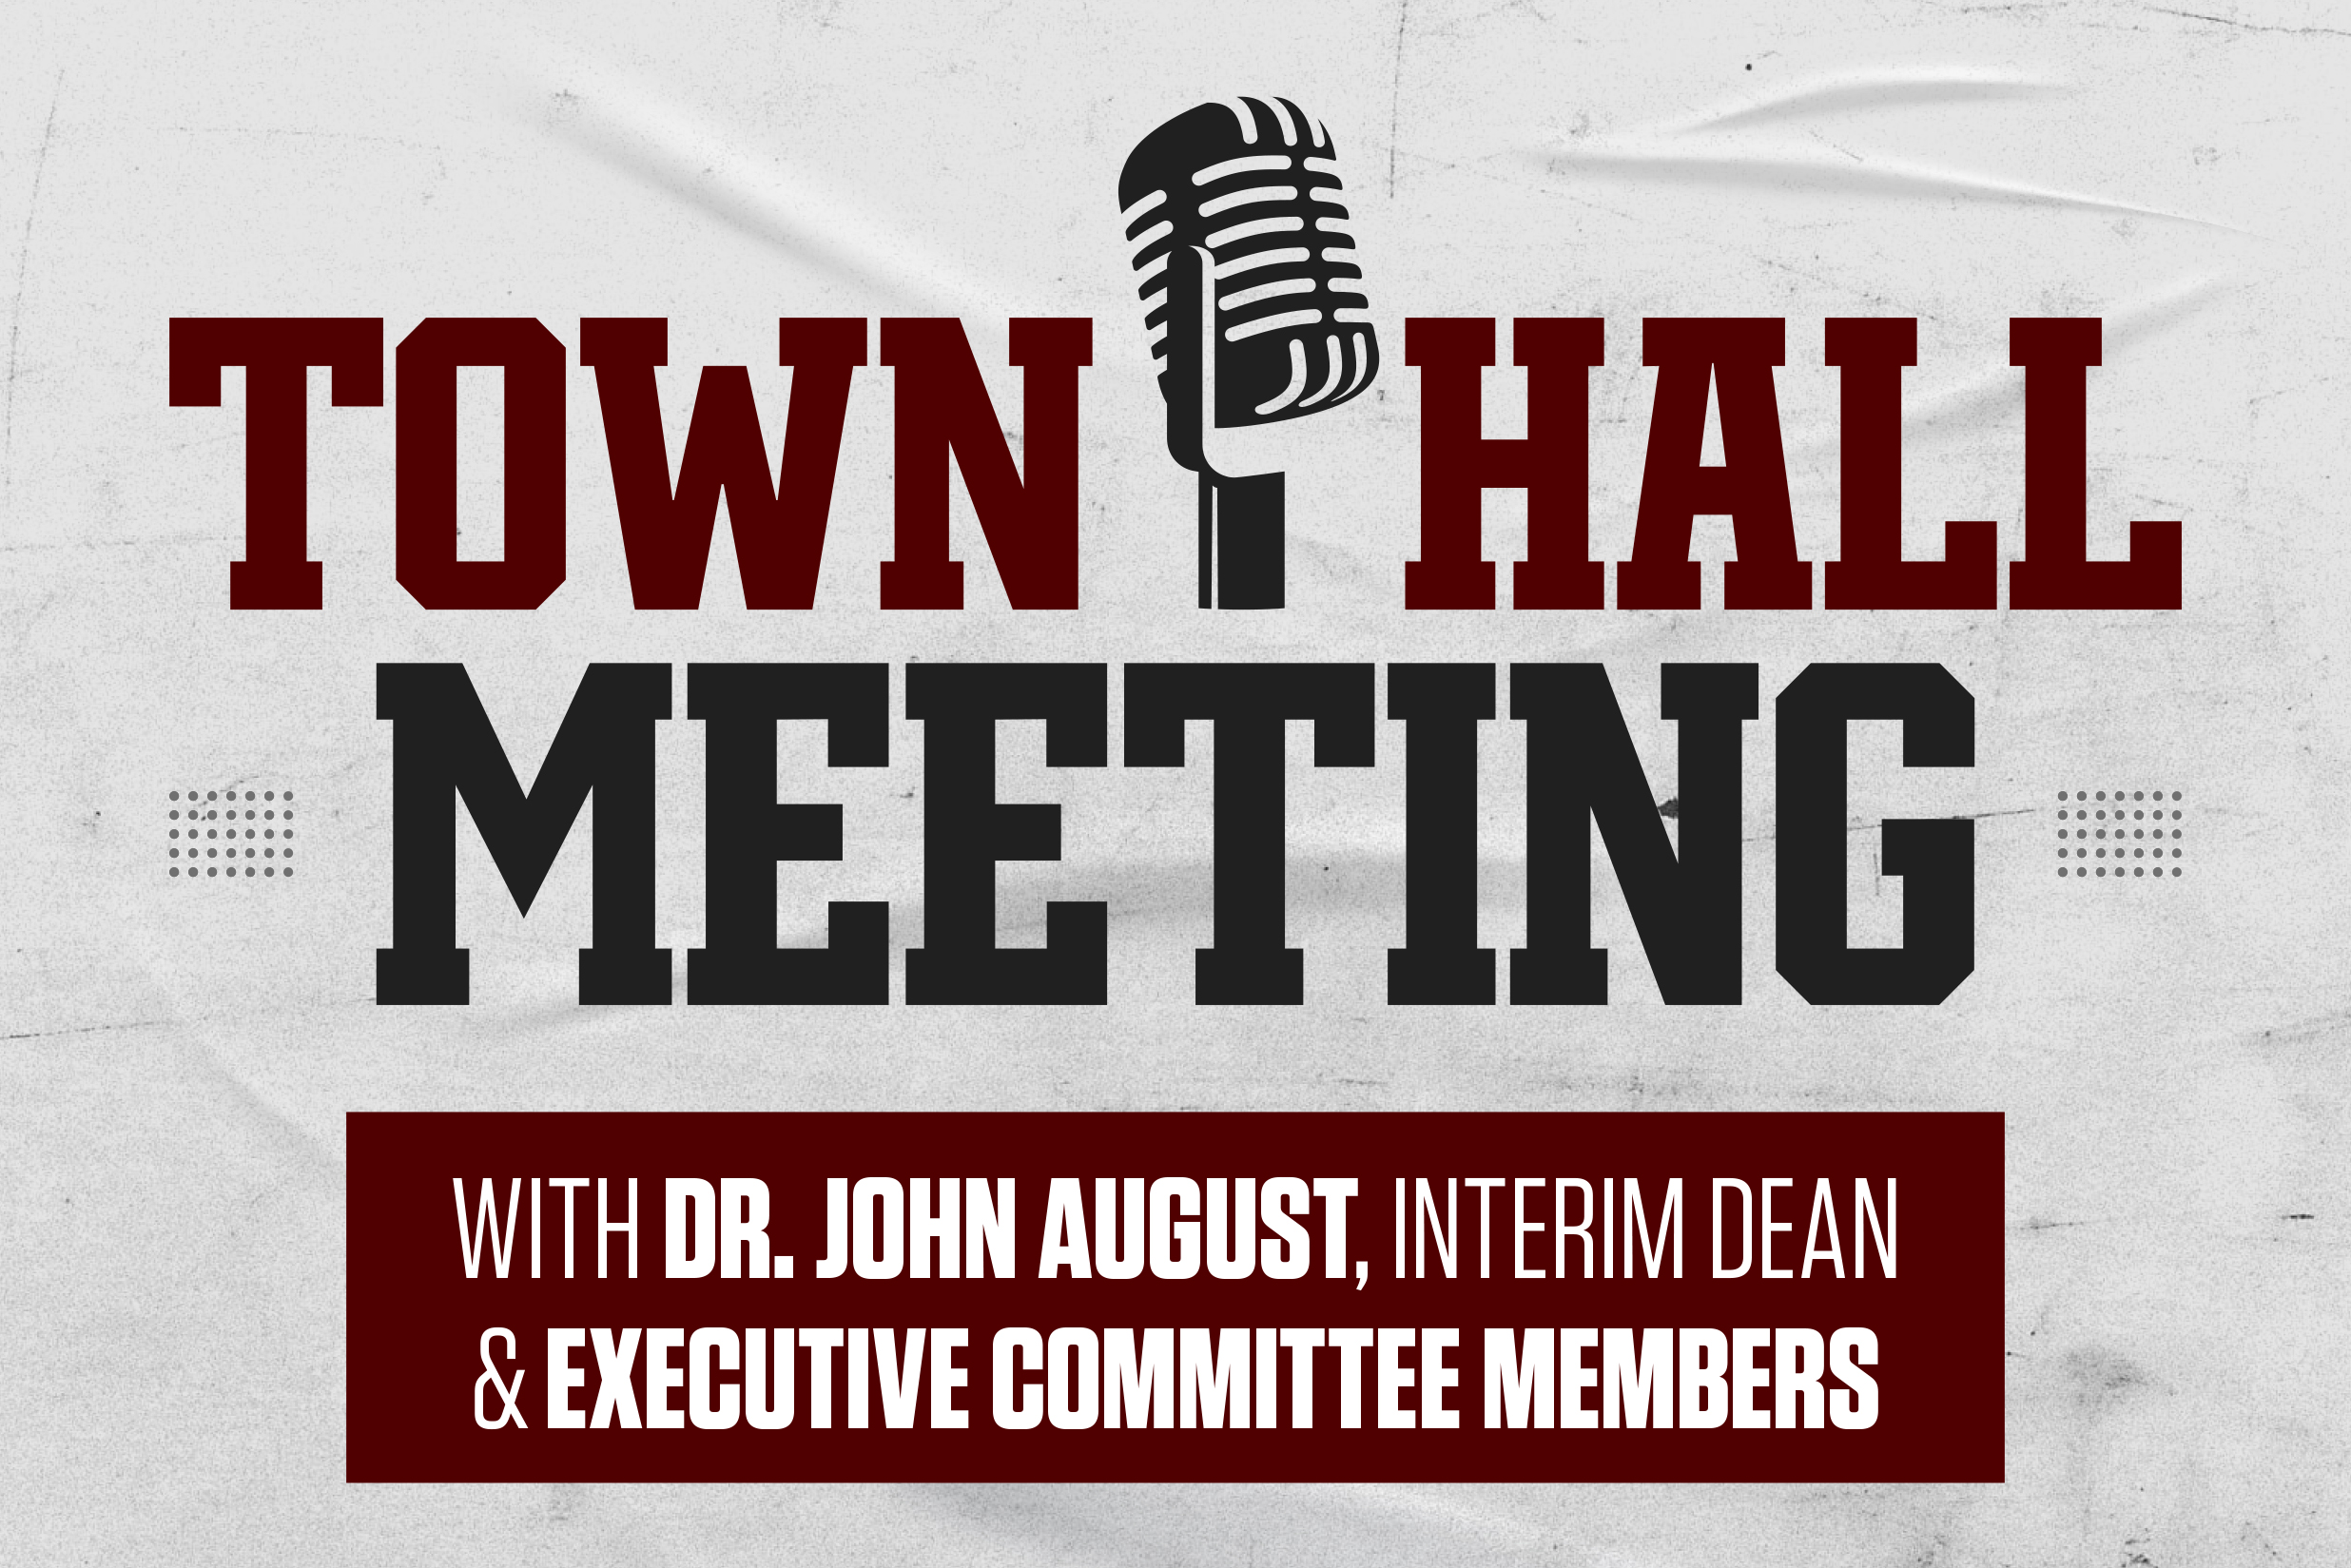 Town Hall meeting with Dr. John August, interin dean, and executive committee members